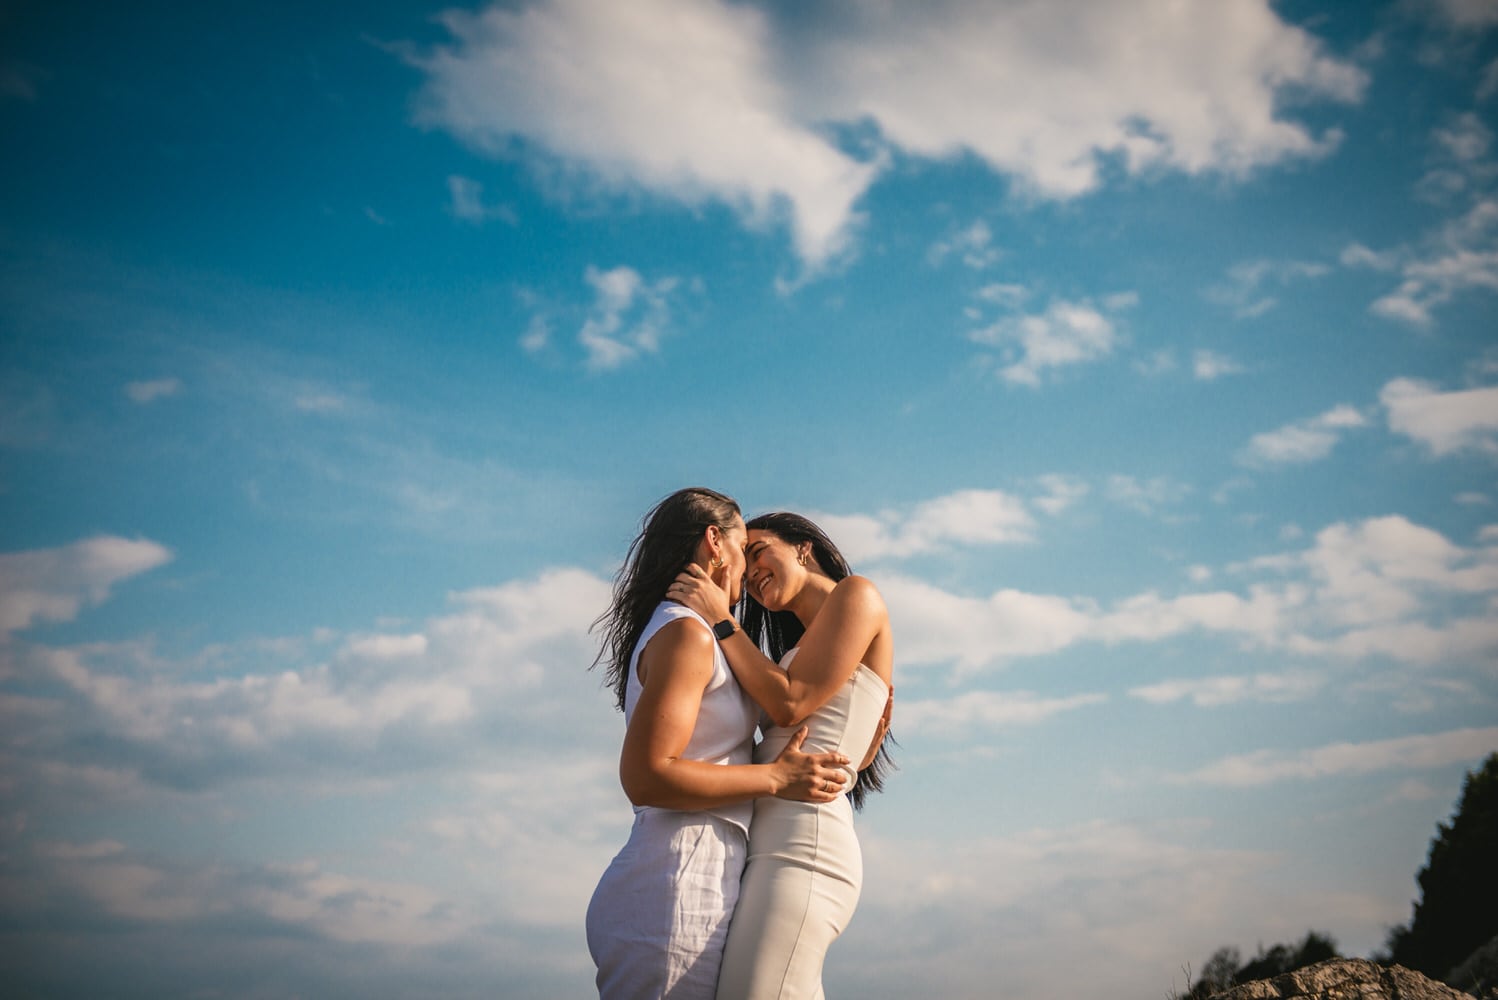 Unexpected unity: Brides encounter two brown snakes, nature's embrace of their love during their Corfu elopement.